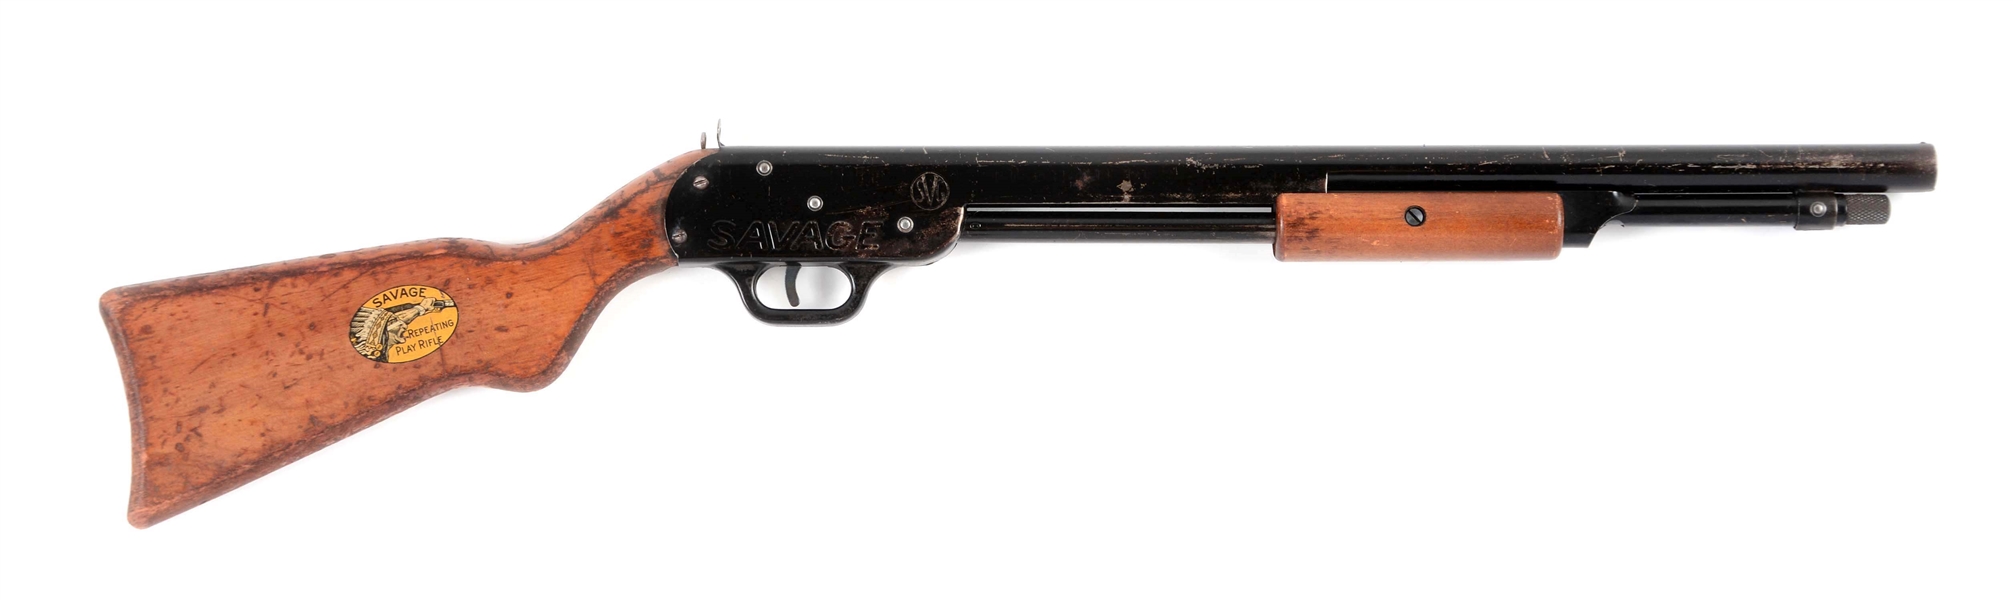 SAVAGE REPEATING PLAY RIFLE WITH DECAL.